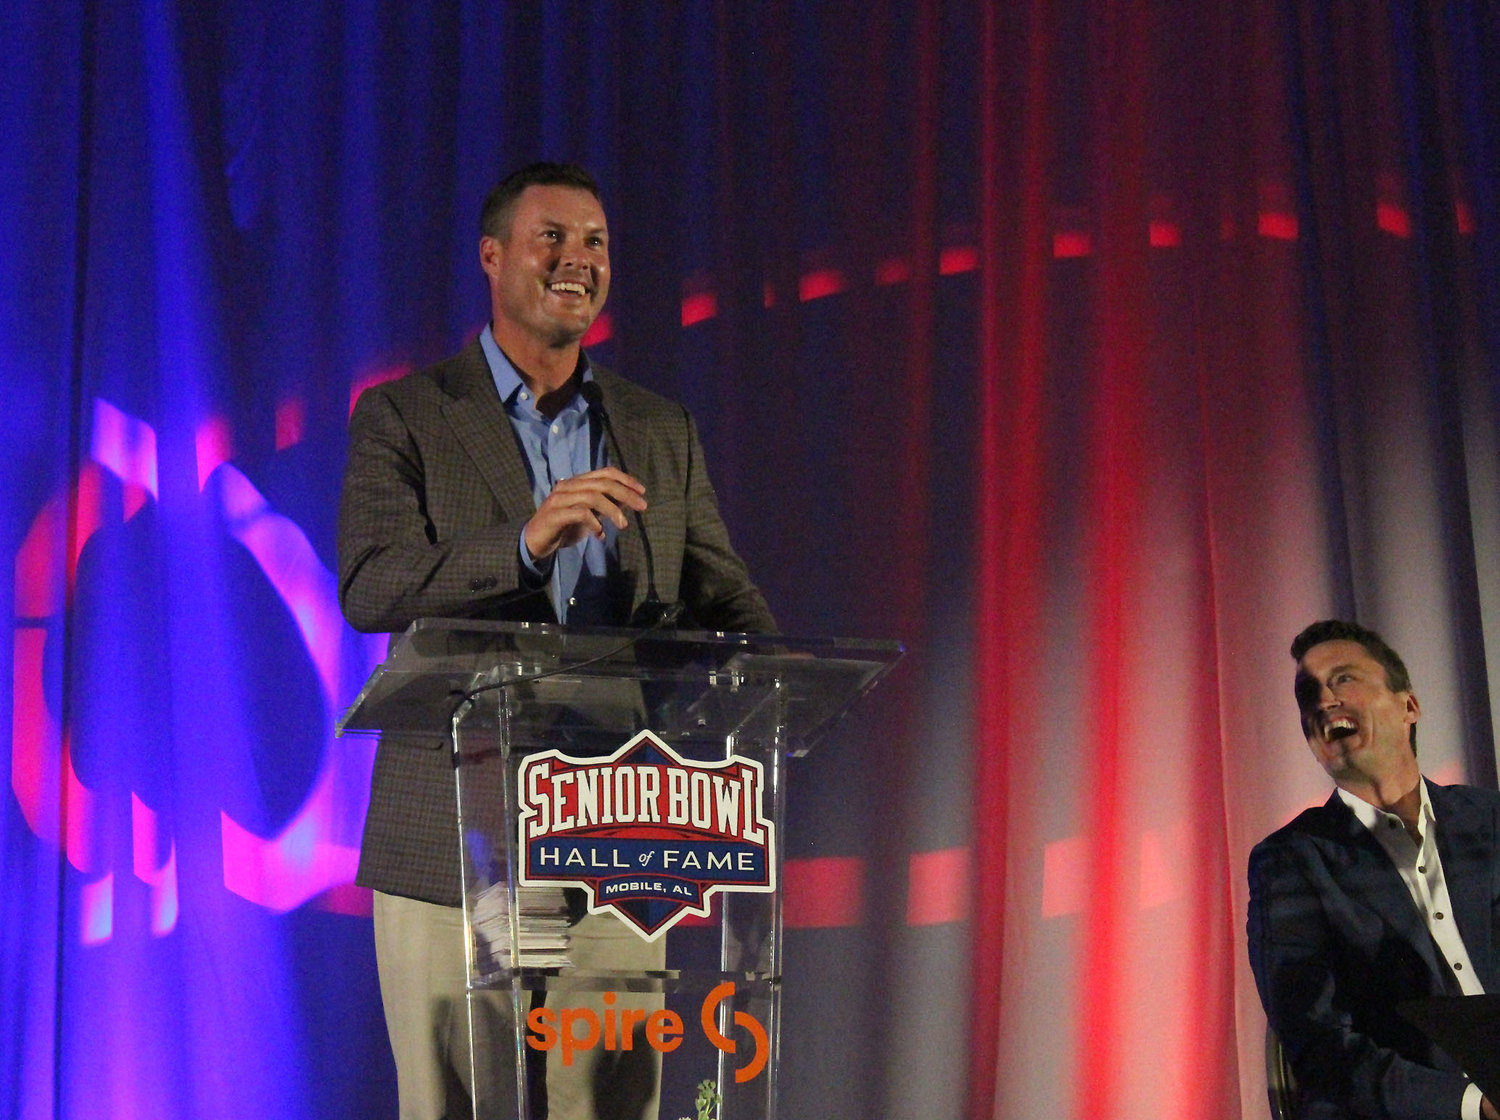 St. Michael Catholic Head Football Coach Philip Rivers cracks a joke during his induction speech at the 2022 Senior Bowl Hall of Fame ceremony in Point Clear Sunday night. Rivers was part of the 33rd Hall of Fame class that was inducted June 26.